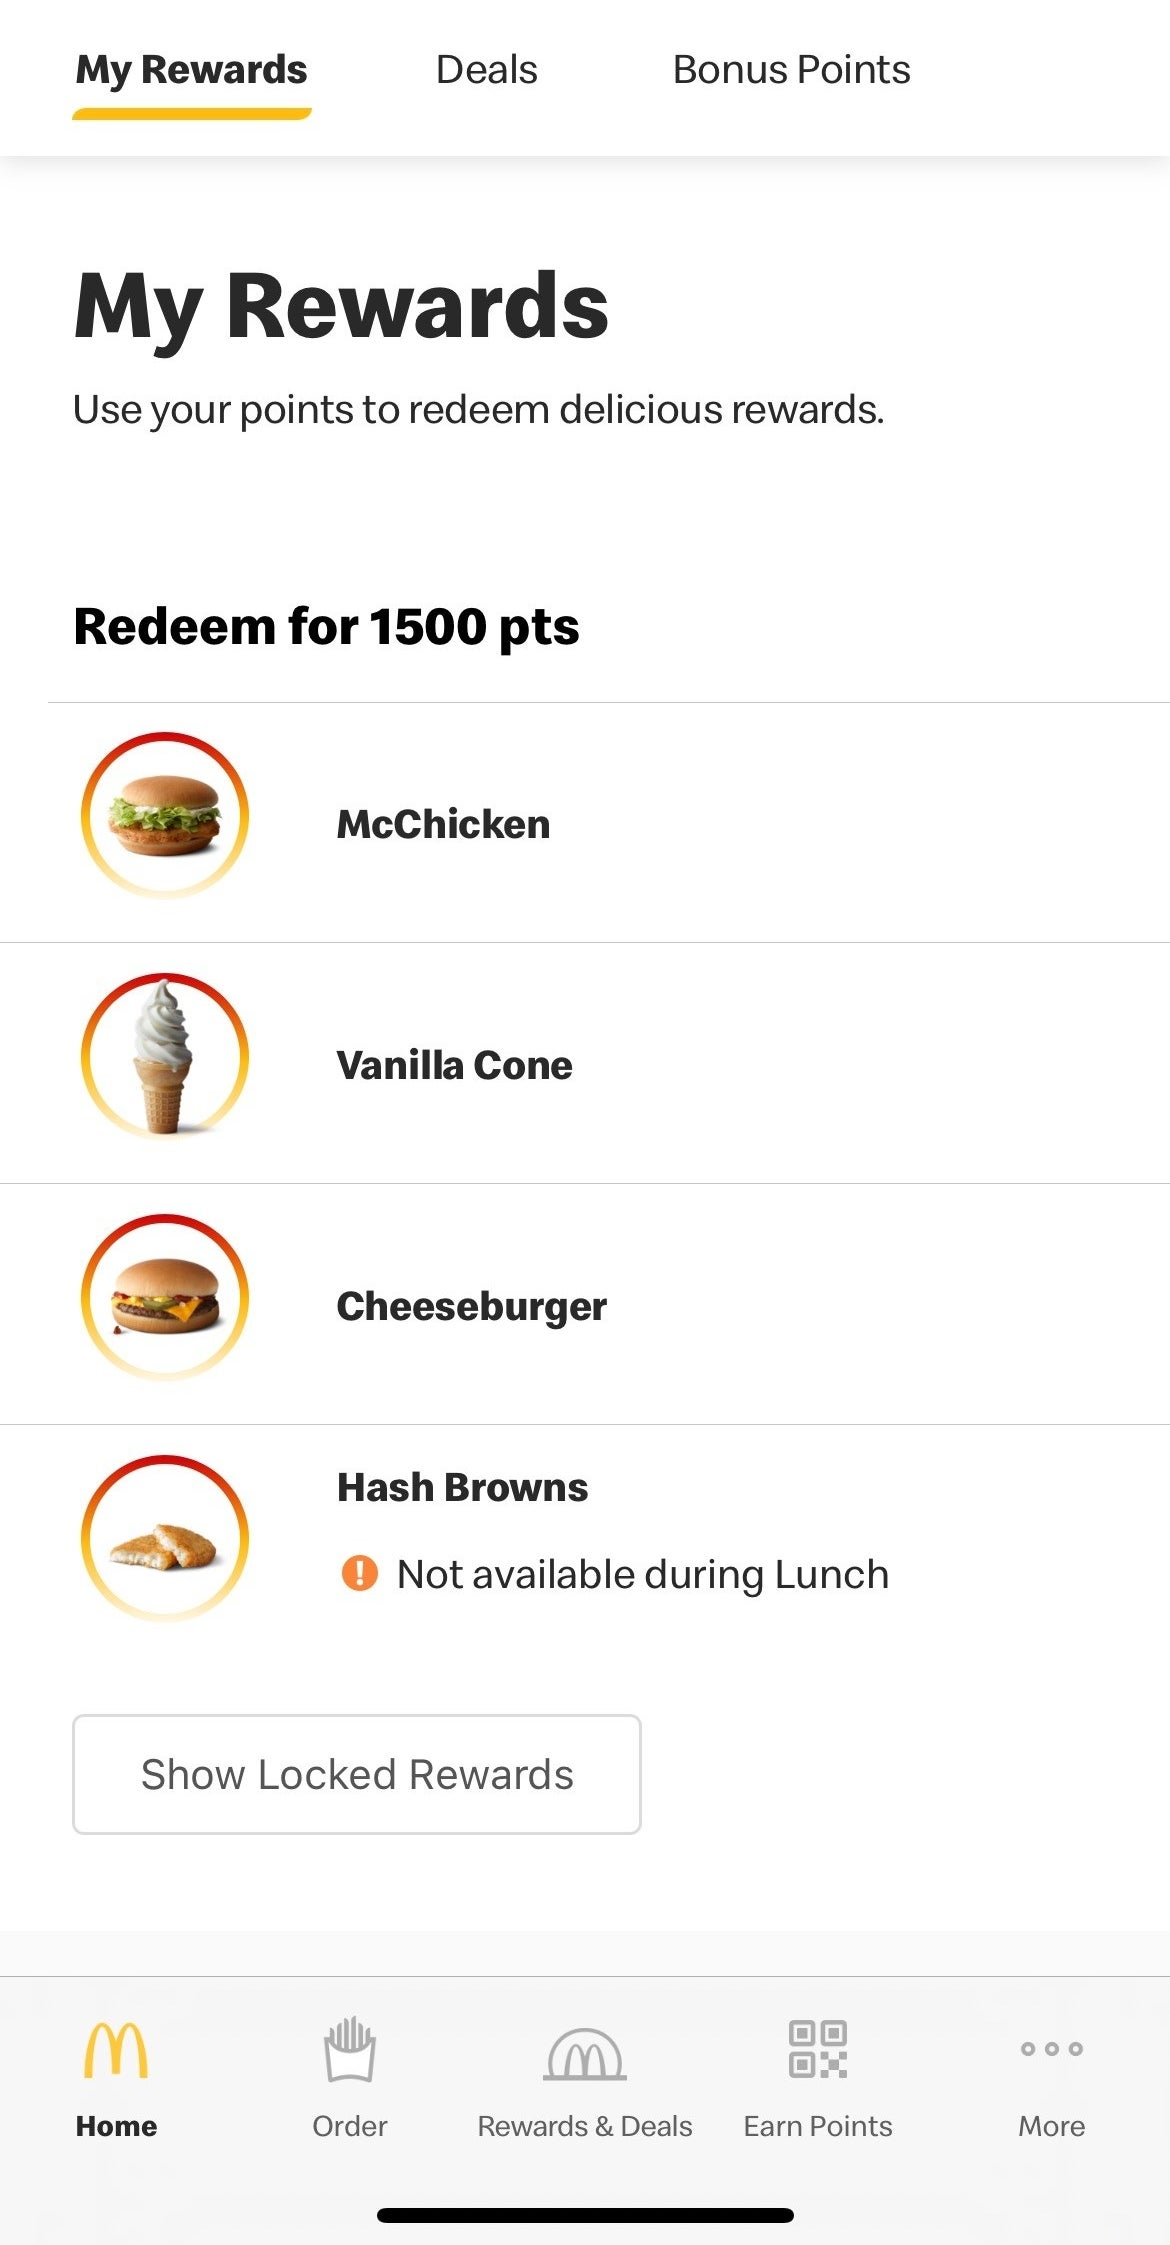 Different items that can be redeemed for 1500 points including a McChicken, Vanilla cone, Cheeseburger, and hash browns